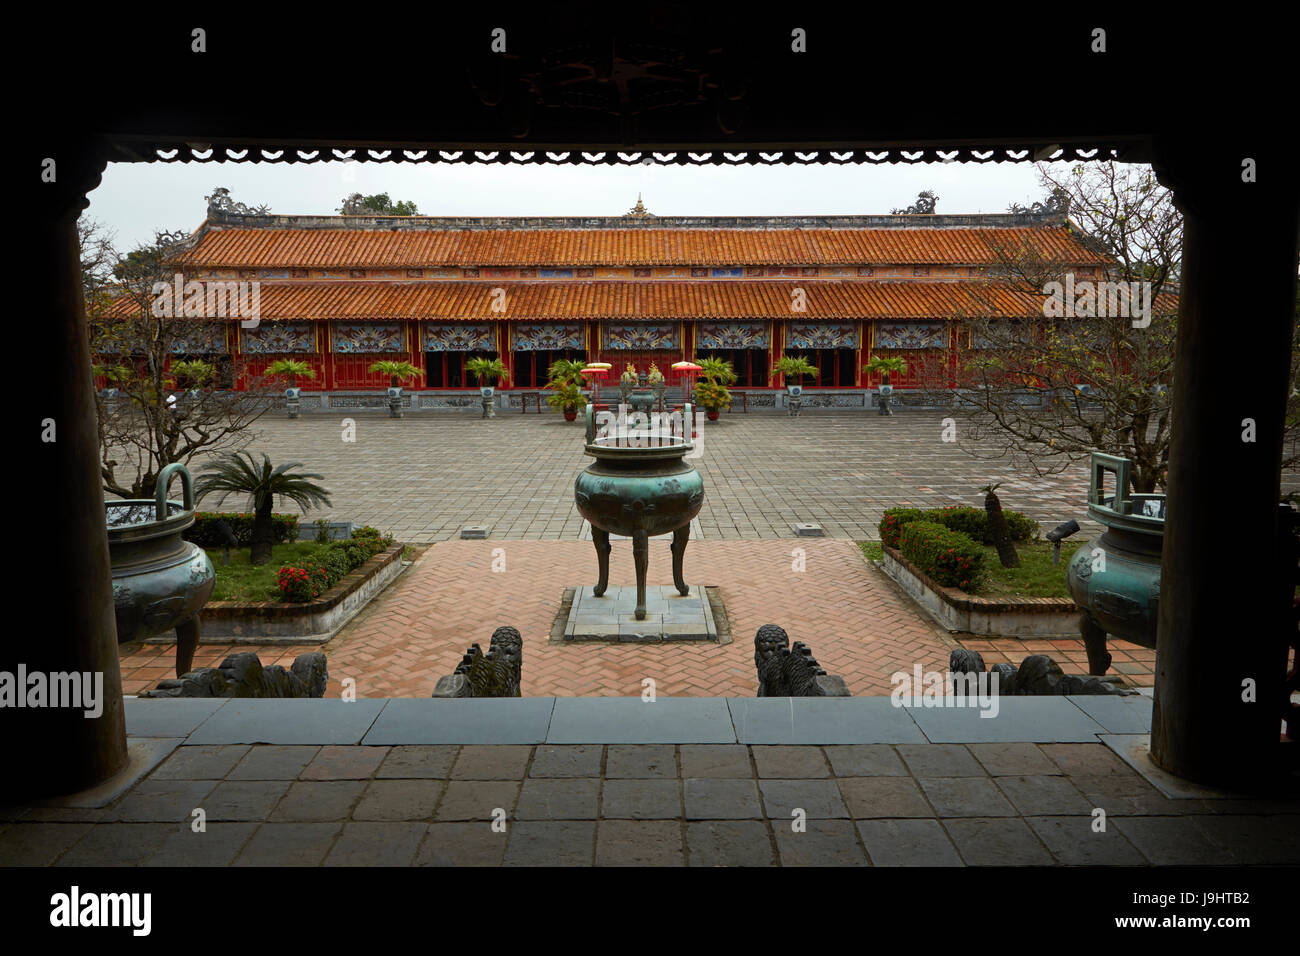 One of Nine Dynastic Urns (1835/36), and To Mieu Temple, seen from Hien Lam Pavillion, historic Hue Citadel (Imperial City), Hue, North Central Coast, Stock Photo